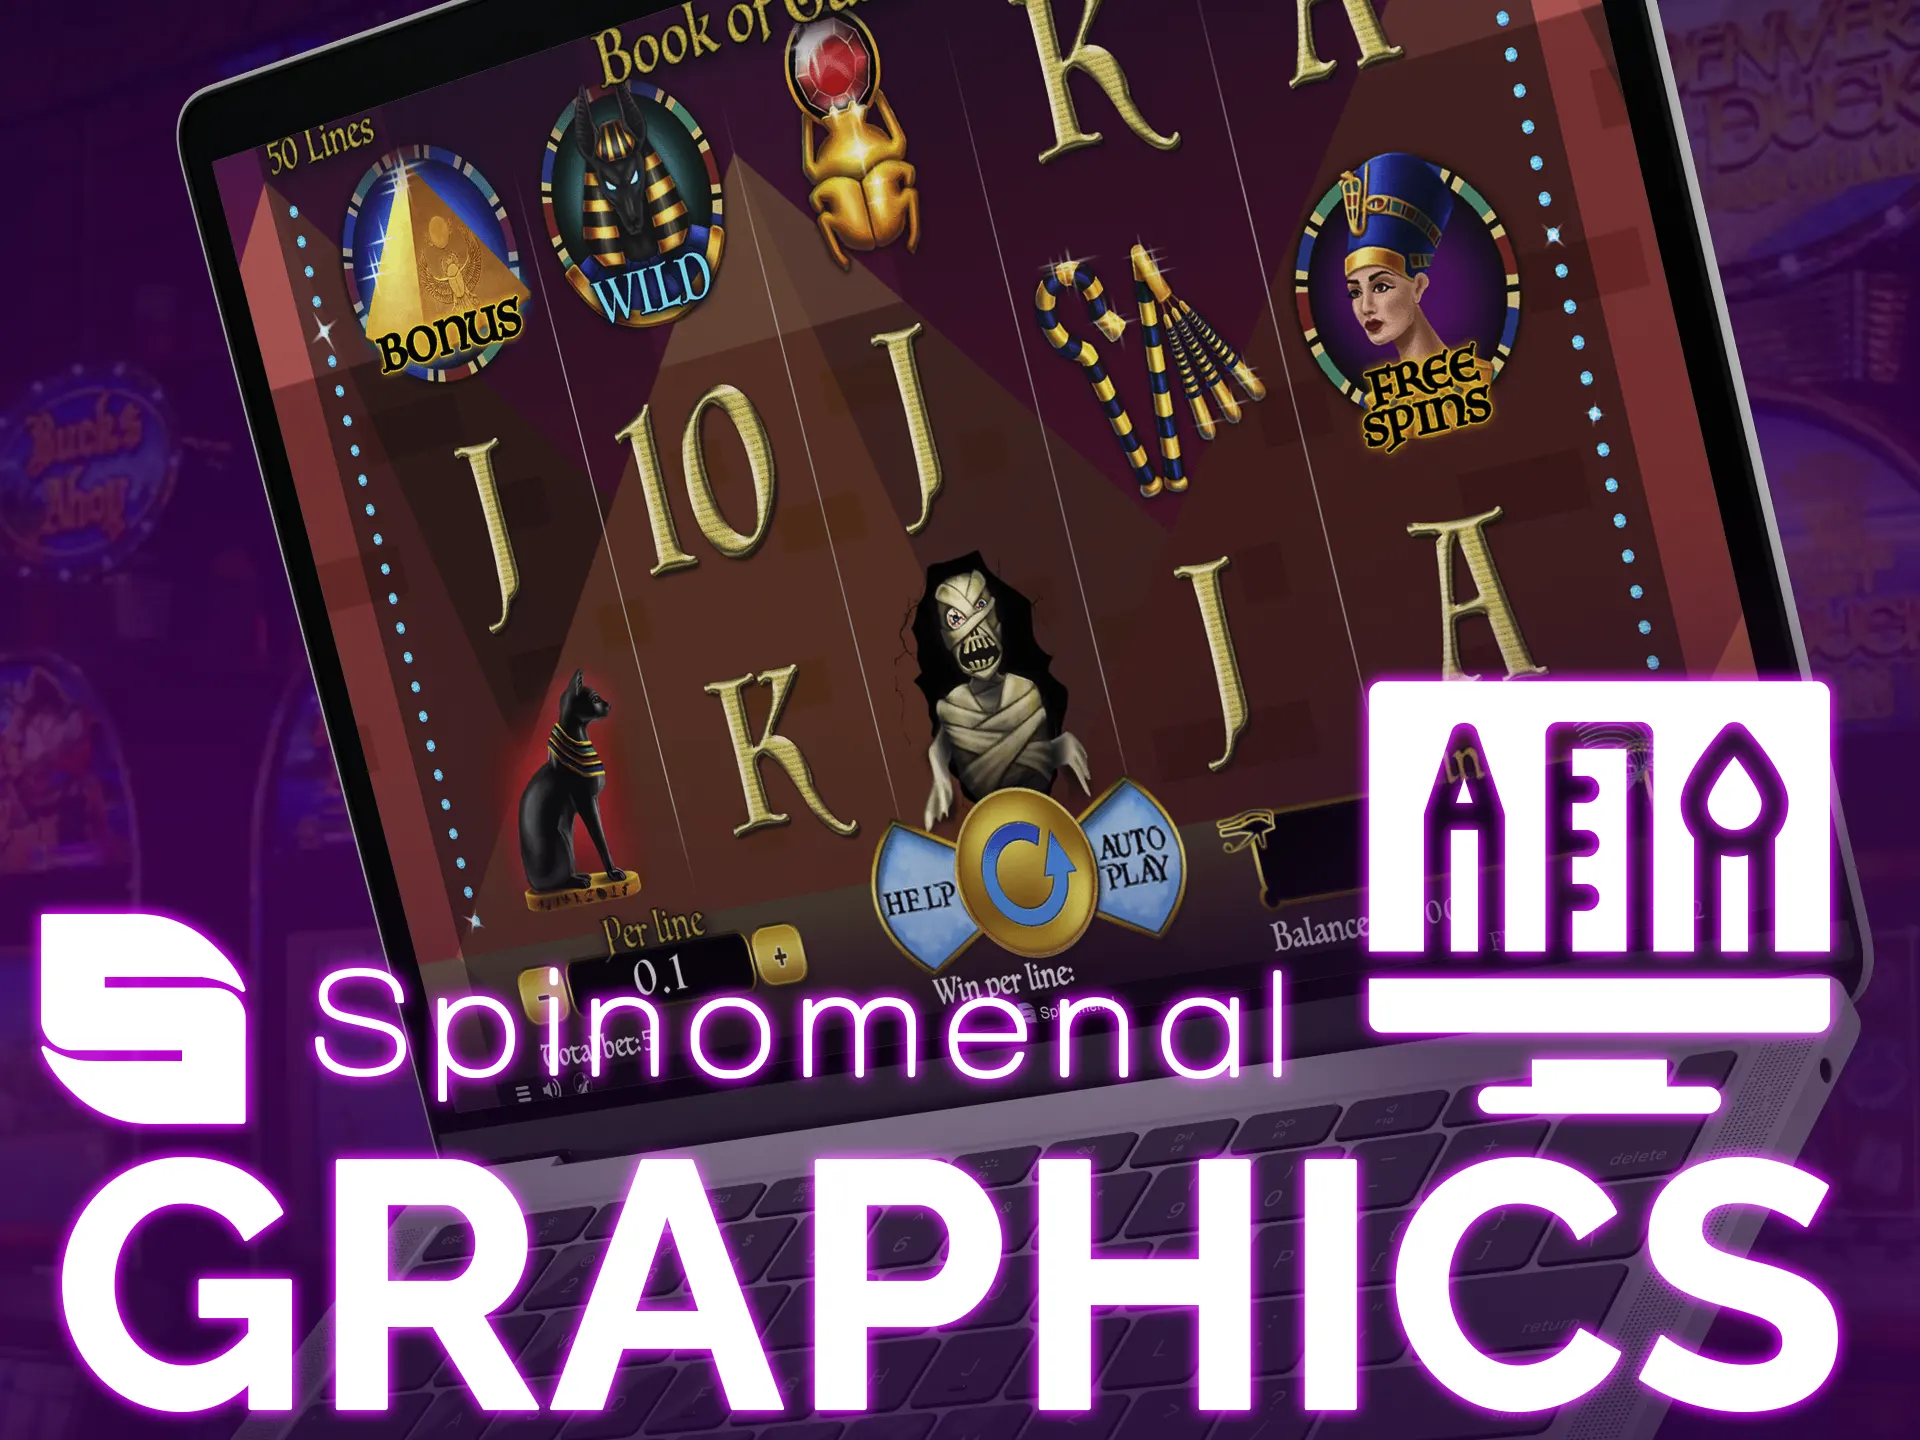 Spinomenal free slots showcase excellent graphics with attention to detail, enhancing visual style across all games.